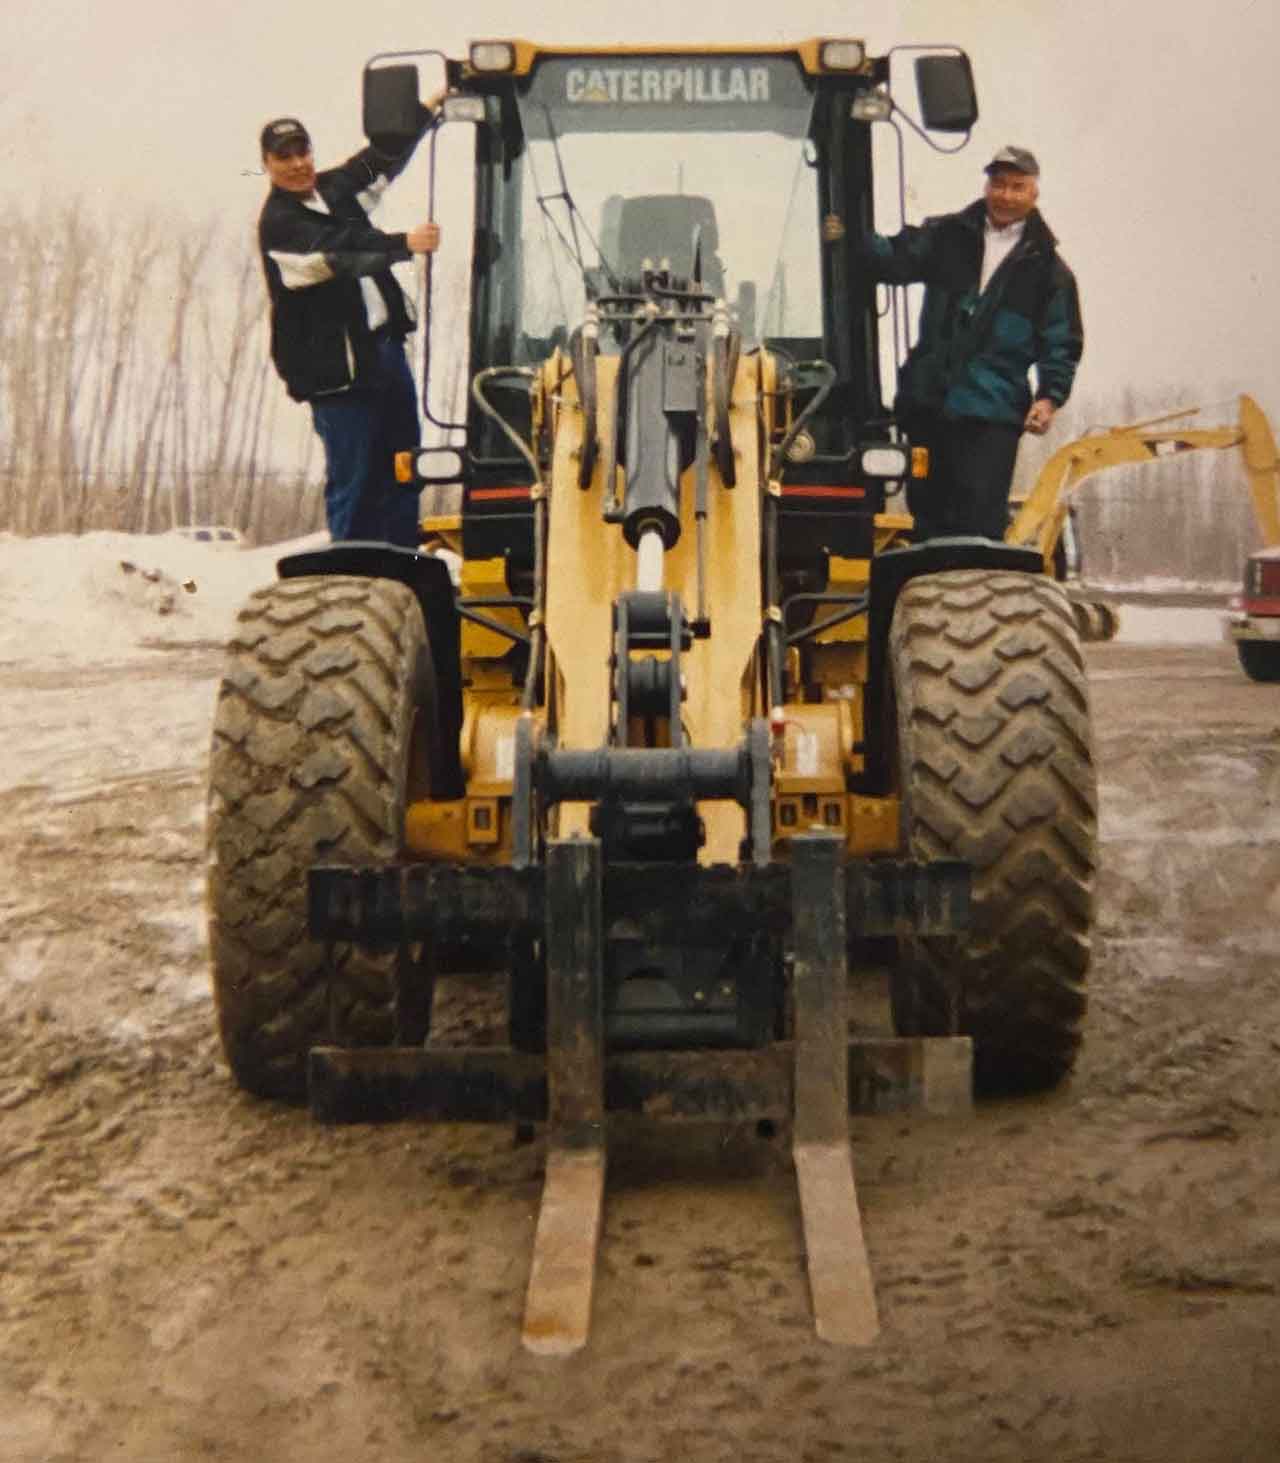 photo submitted by Paul Kataquapit Purchasing their first major piece of equipment, a Caterpillar front end loader, is Paul Kataquapit on the left and his late father Marius Kataquapit.